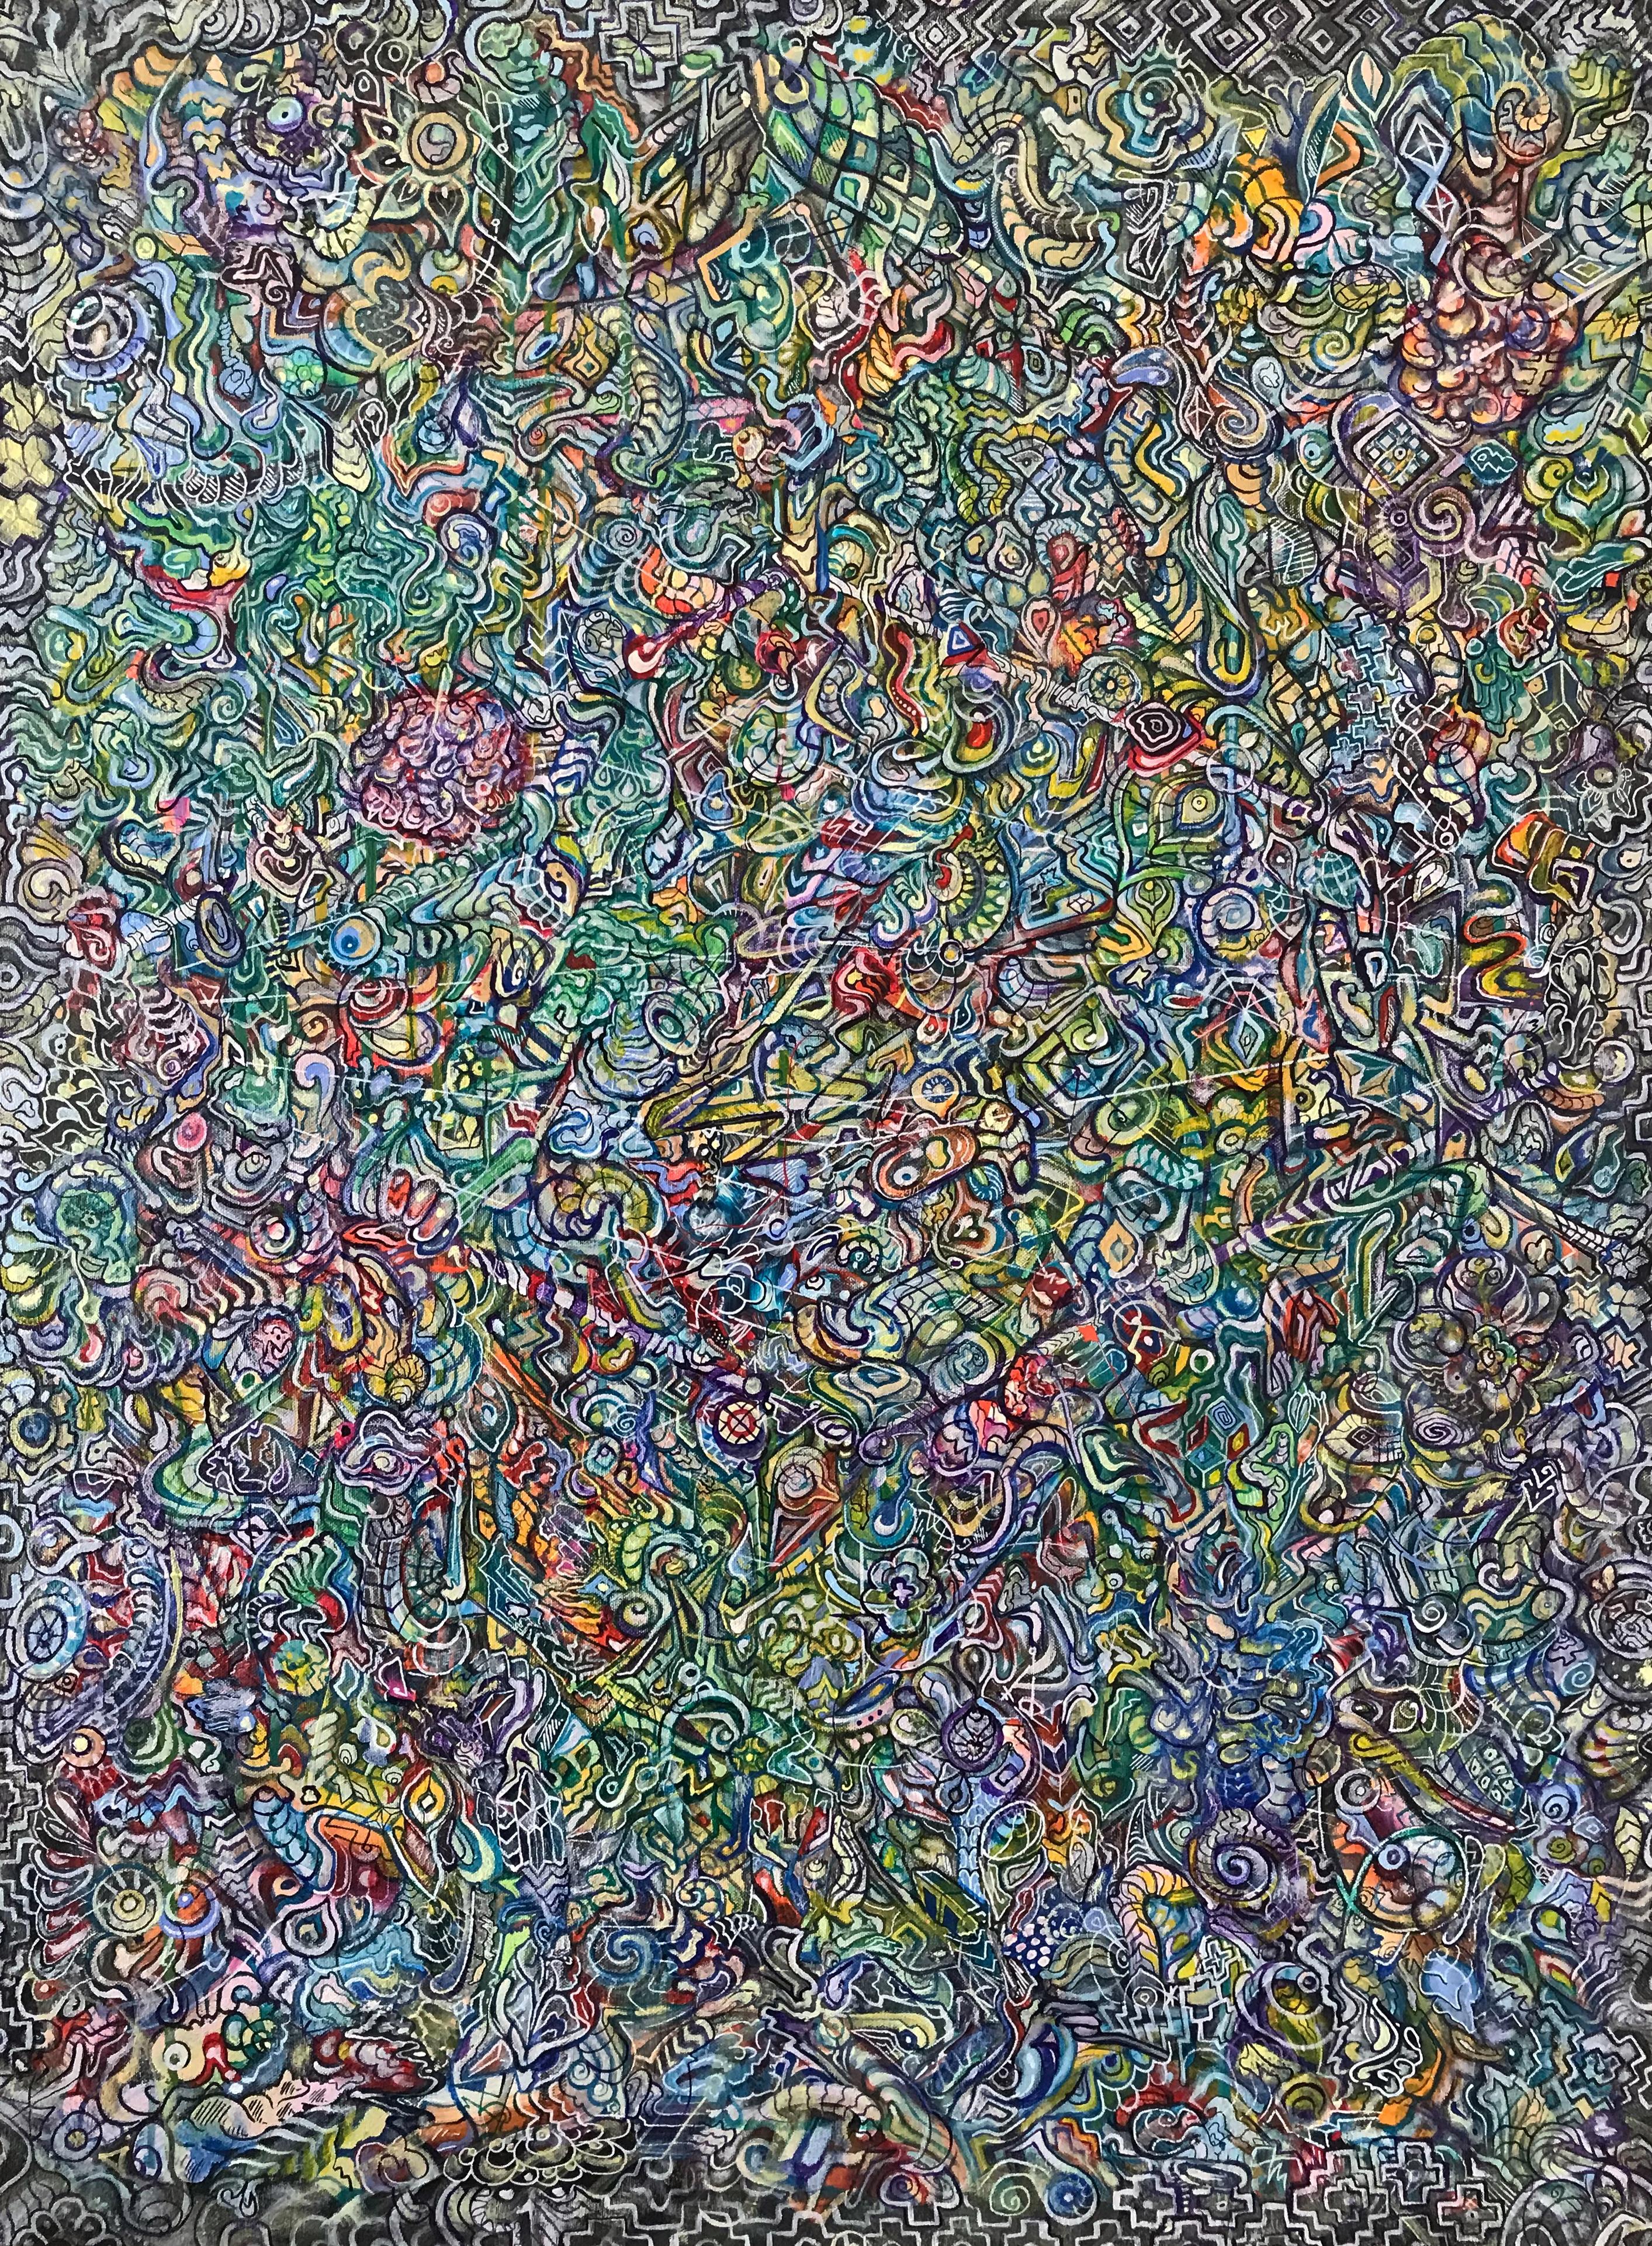 Ethan Meyer Abstract Painting - "Crystalizing Æther", Abstract Acrylic Painting on Canvas, Colorful, Patterns